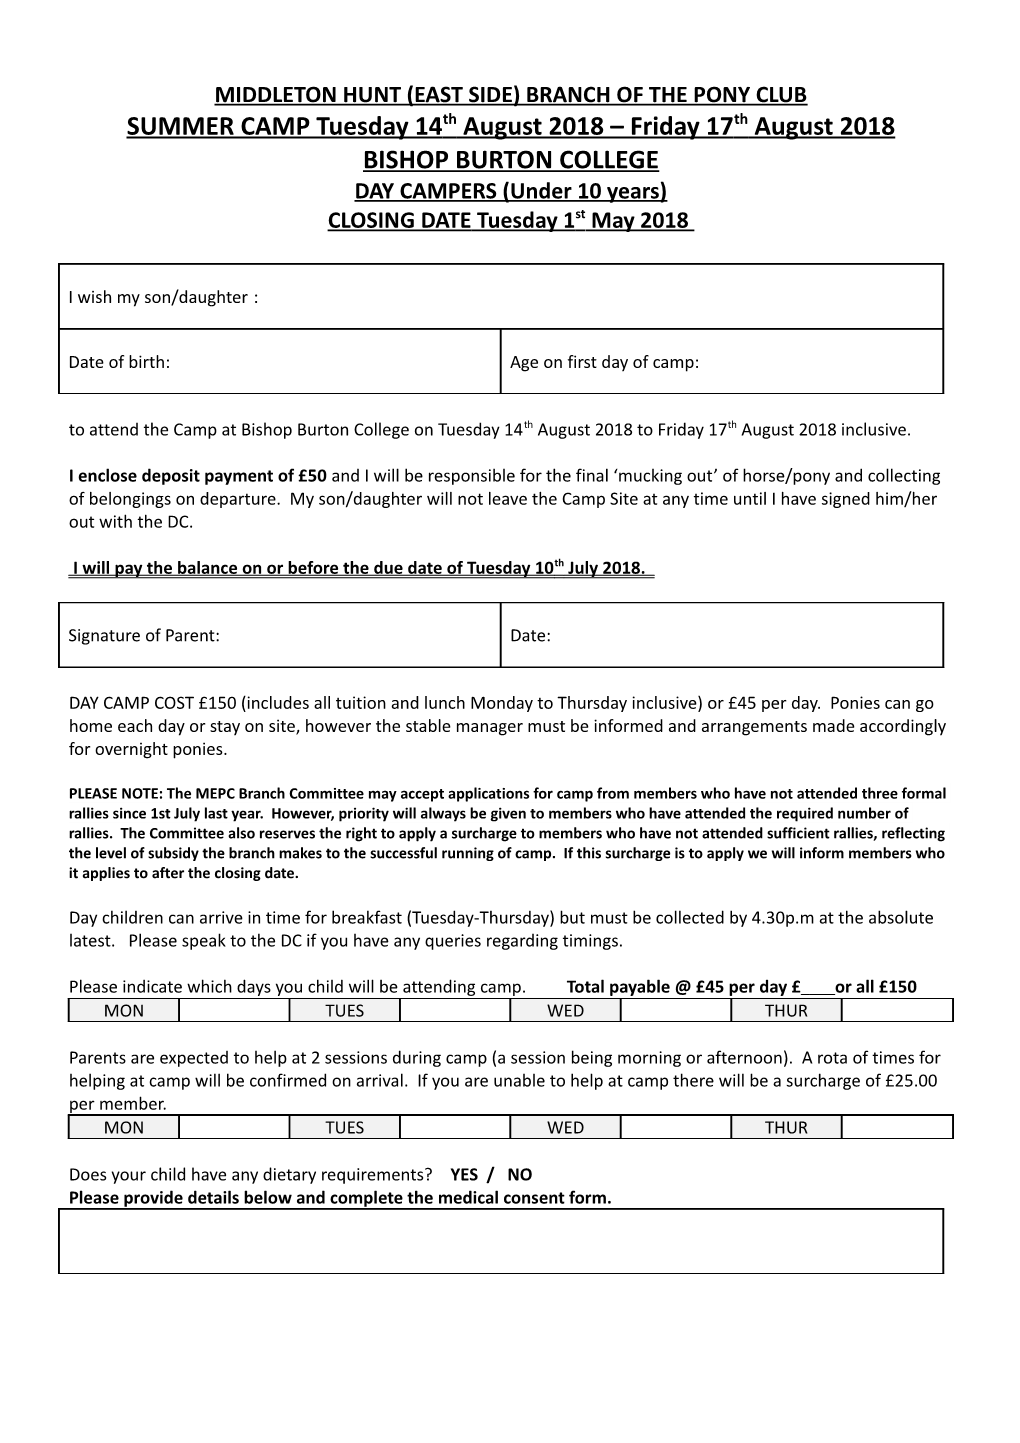 APPLICATION FORM - DAY CAMPERS (Under 10Yrs)